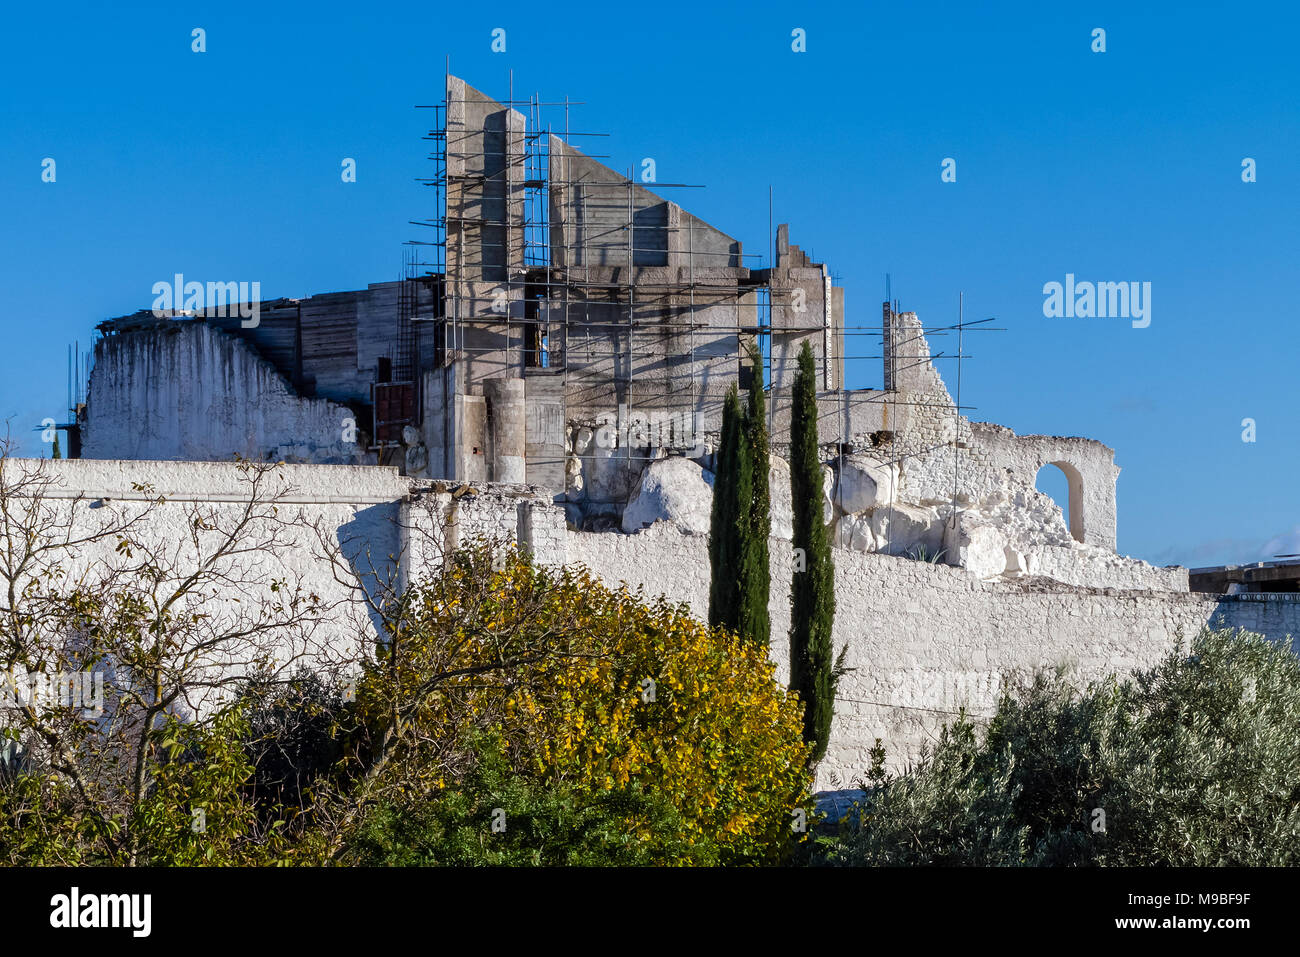 Crato Castle ruins in Crato, Portugal. Destroyed in battle. Belonged to the Hospitaller Crusader Knights aka Malta Order. Being rebuilt by a private w Stock Photo